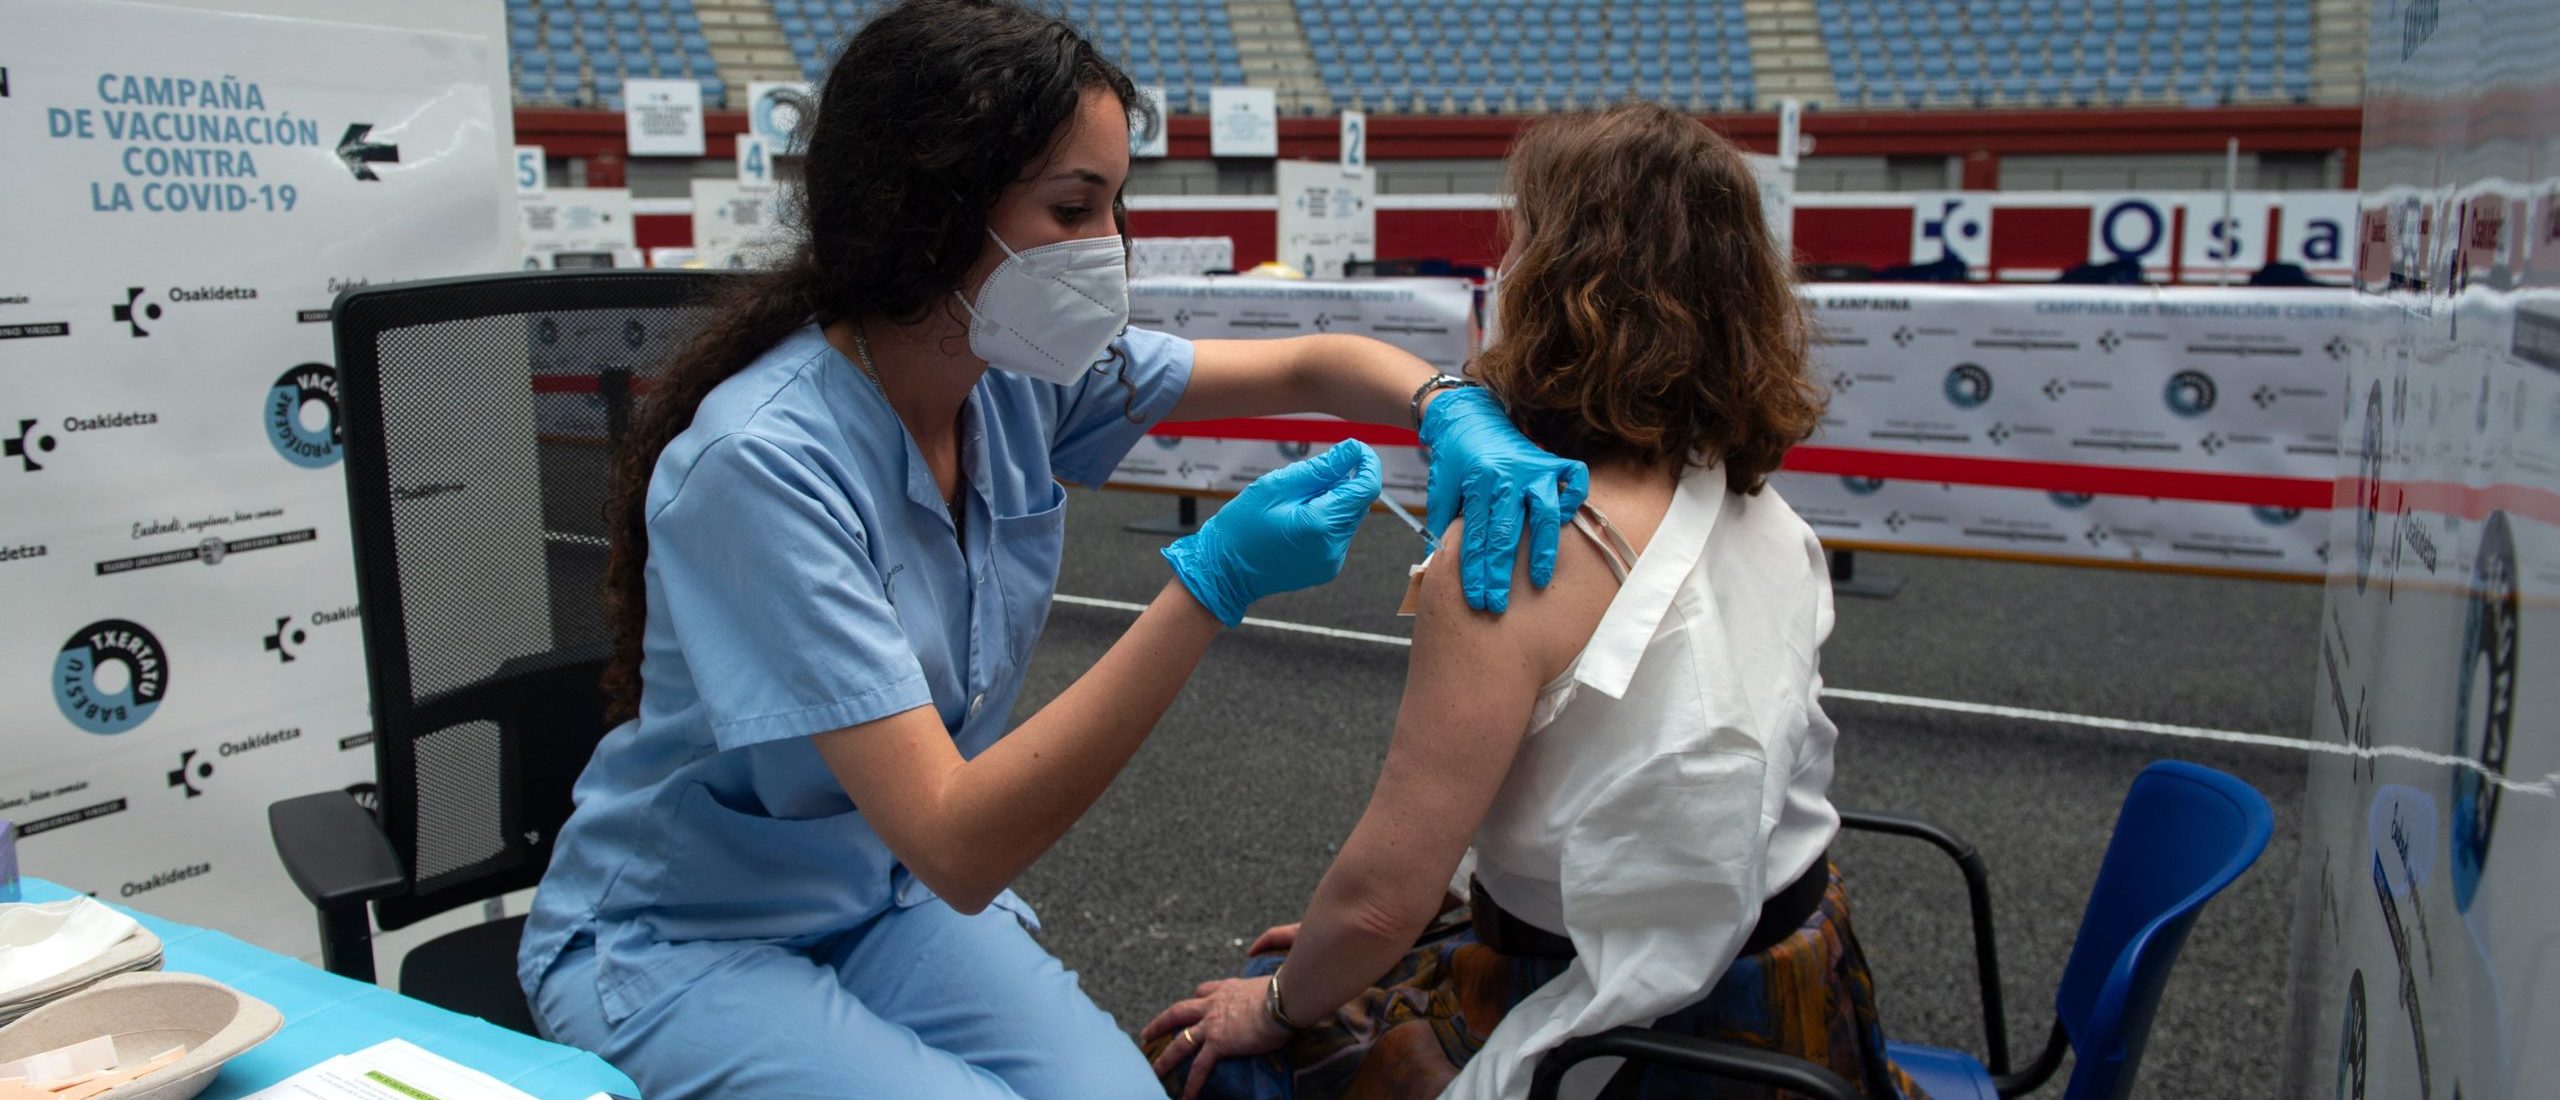 A health worker inoculates a woman with a vaccine against Covid-19 at the Donostia Arena former bullring in San Sebastian on May 31, 2021. (Photo by ANDER GILLENEA/AFP via Getty Images)